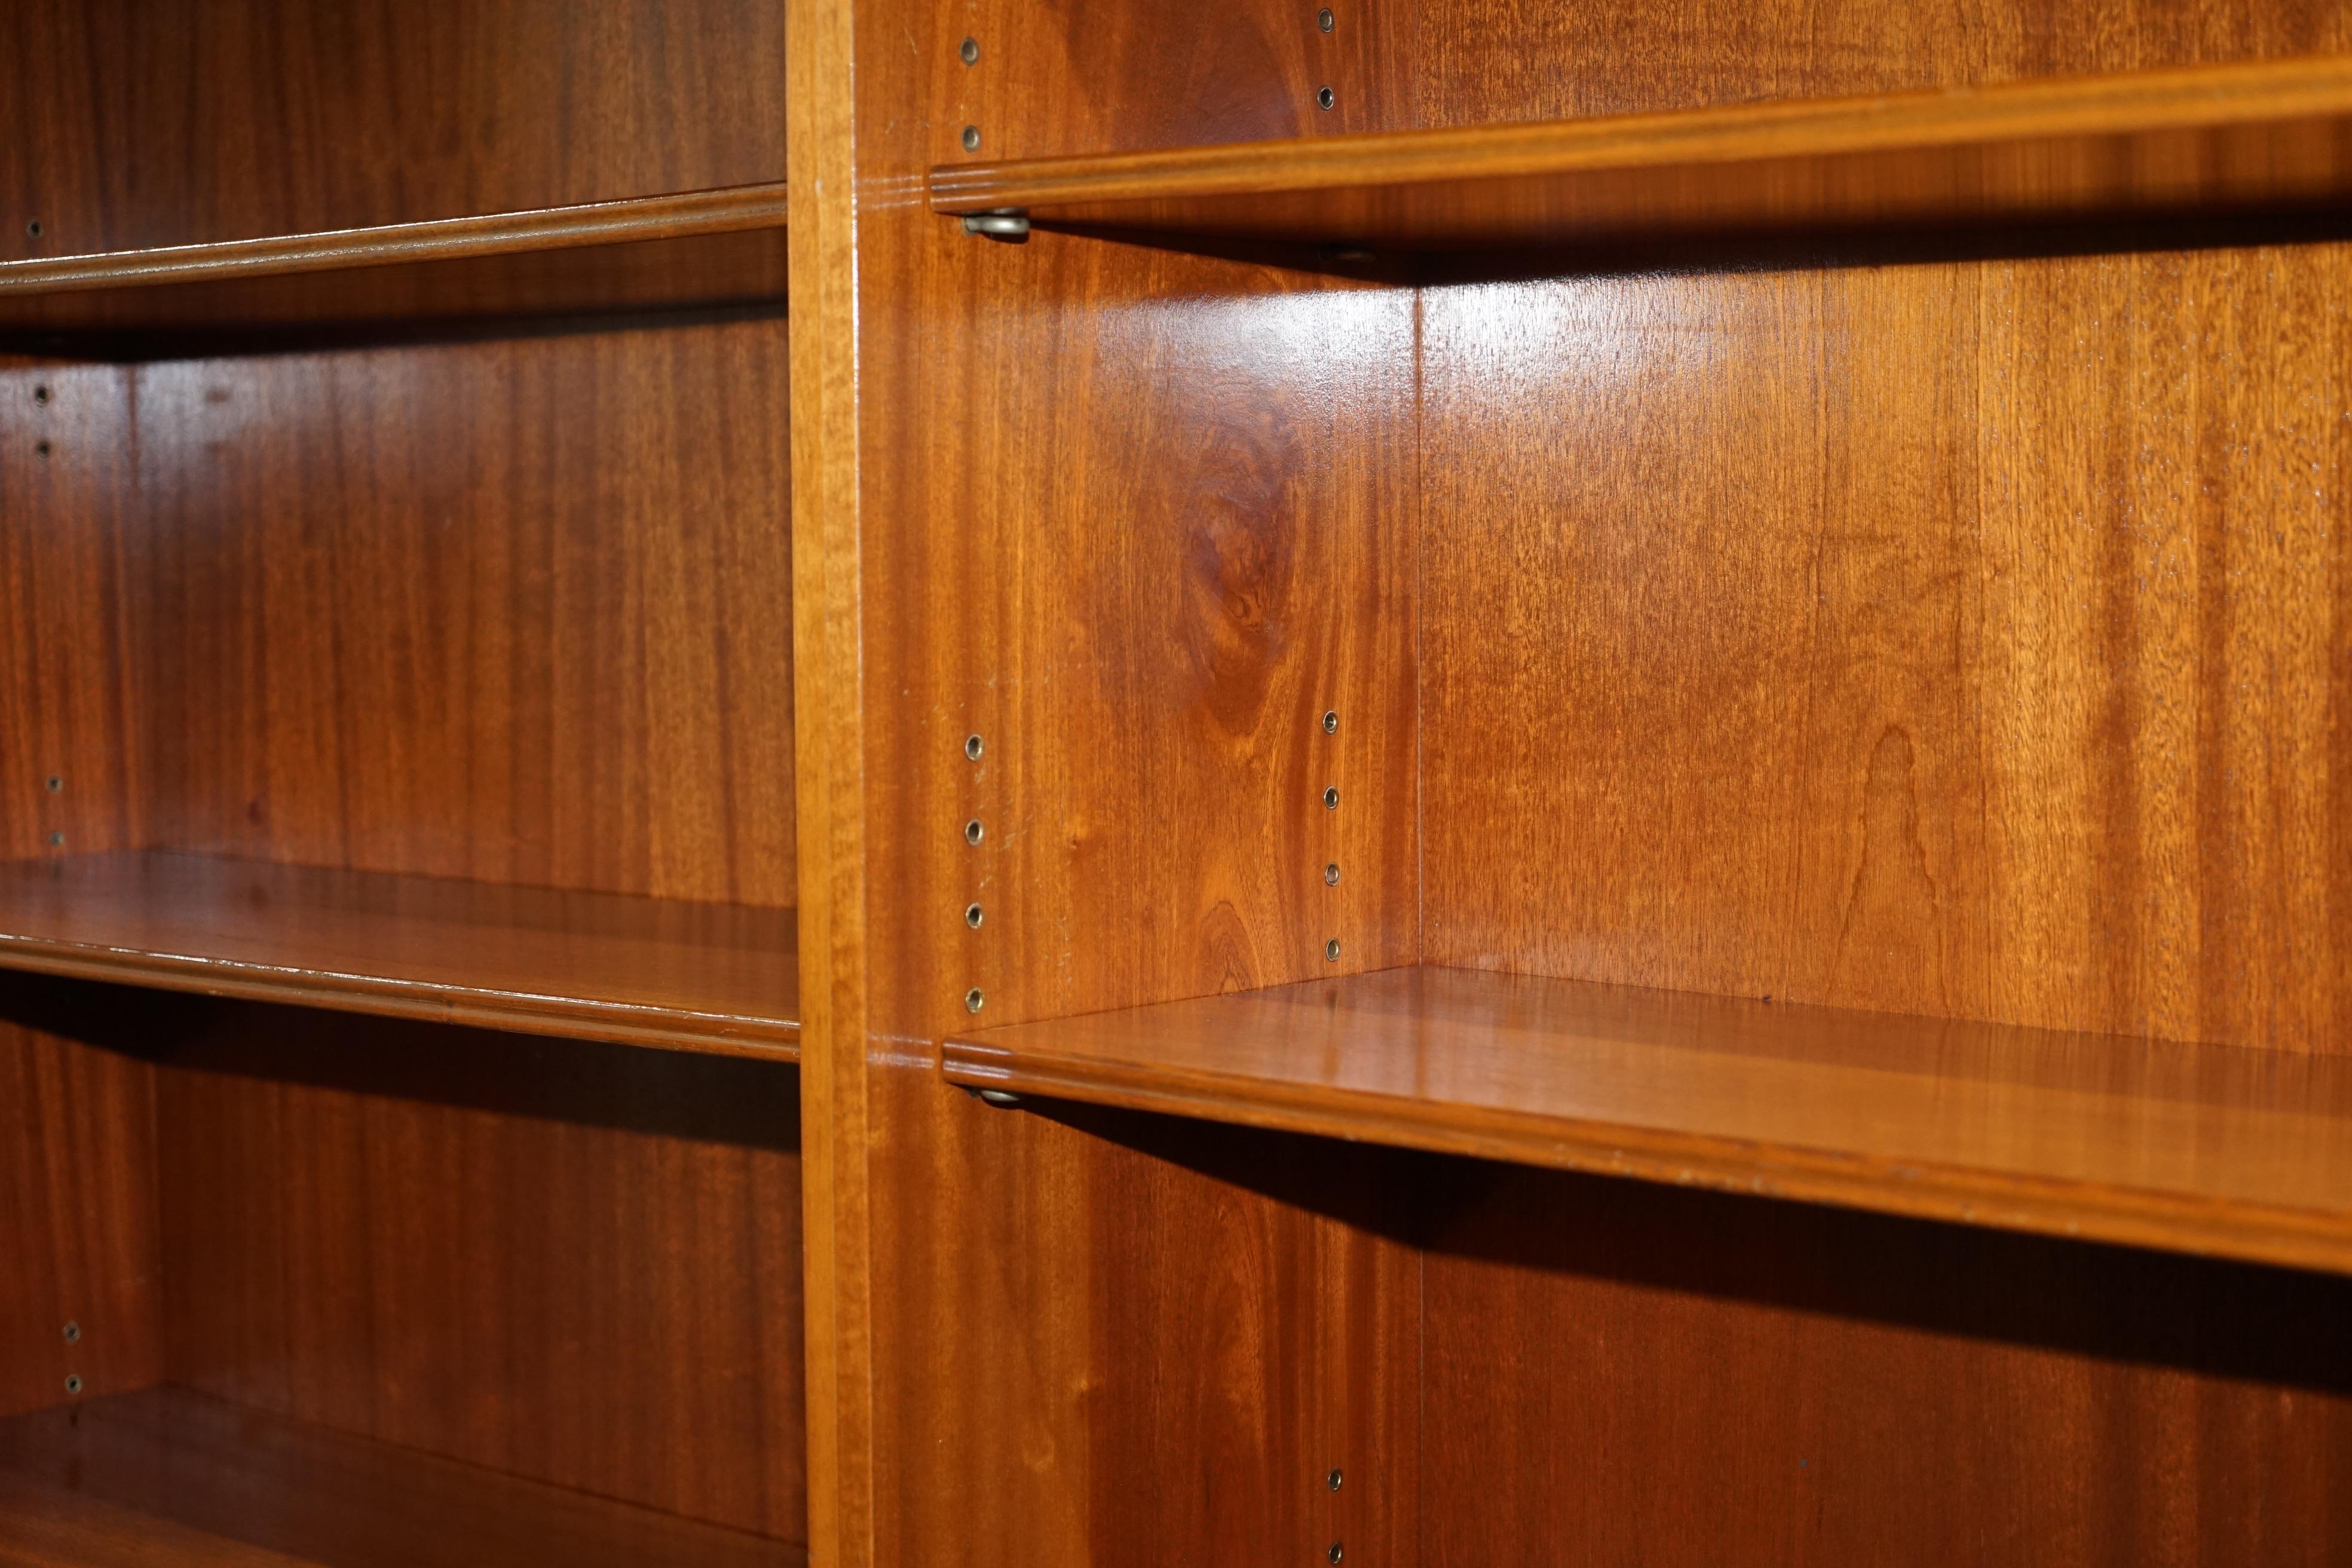 Hand-Crafted Stunning FLAMED YEW WOOD BRADLEY ENGLAND TRIPLE BANK LiBRARY BOOKCASE CUPBOARD